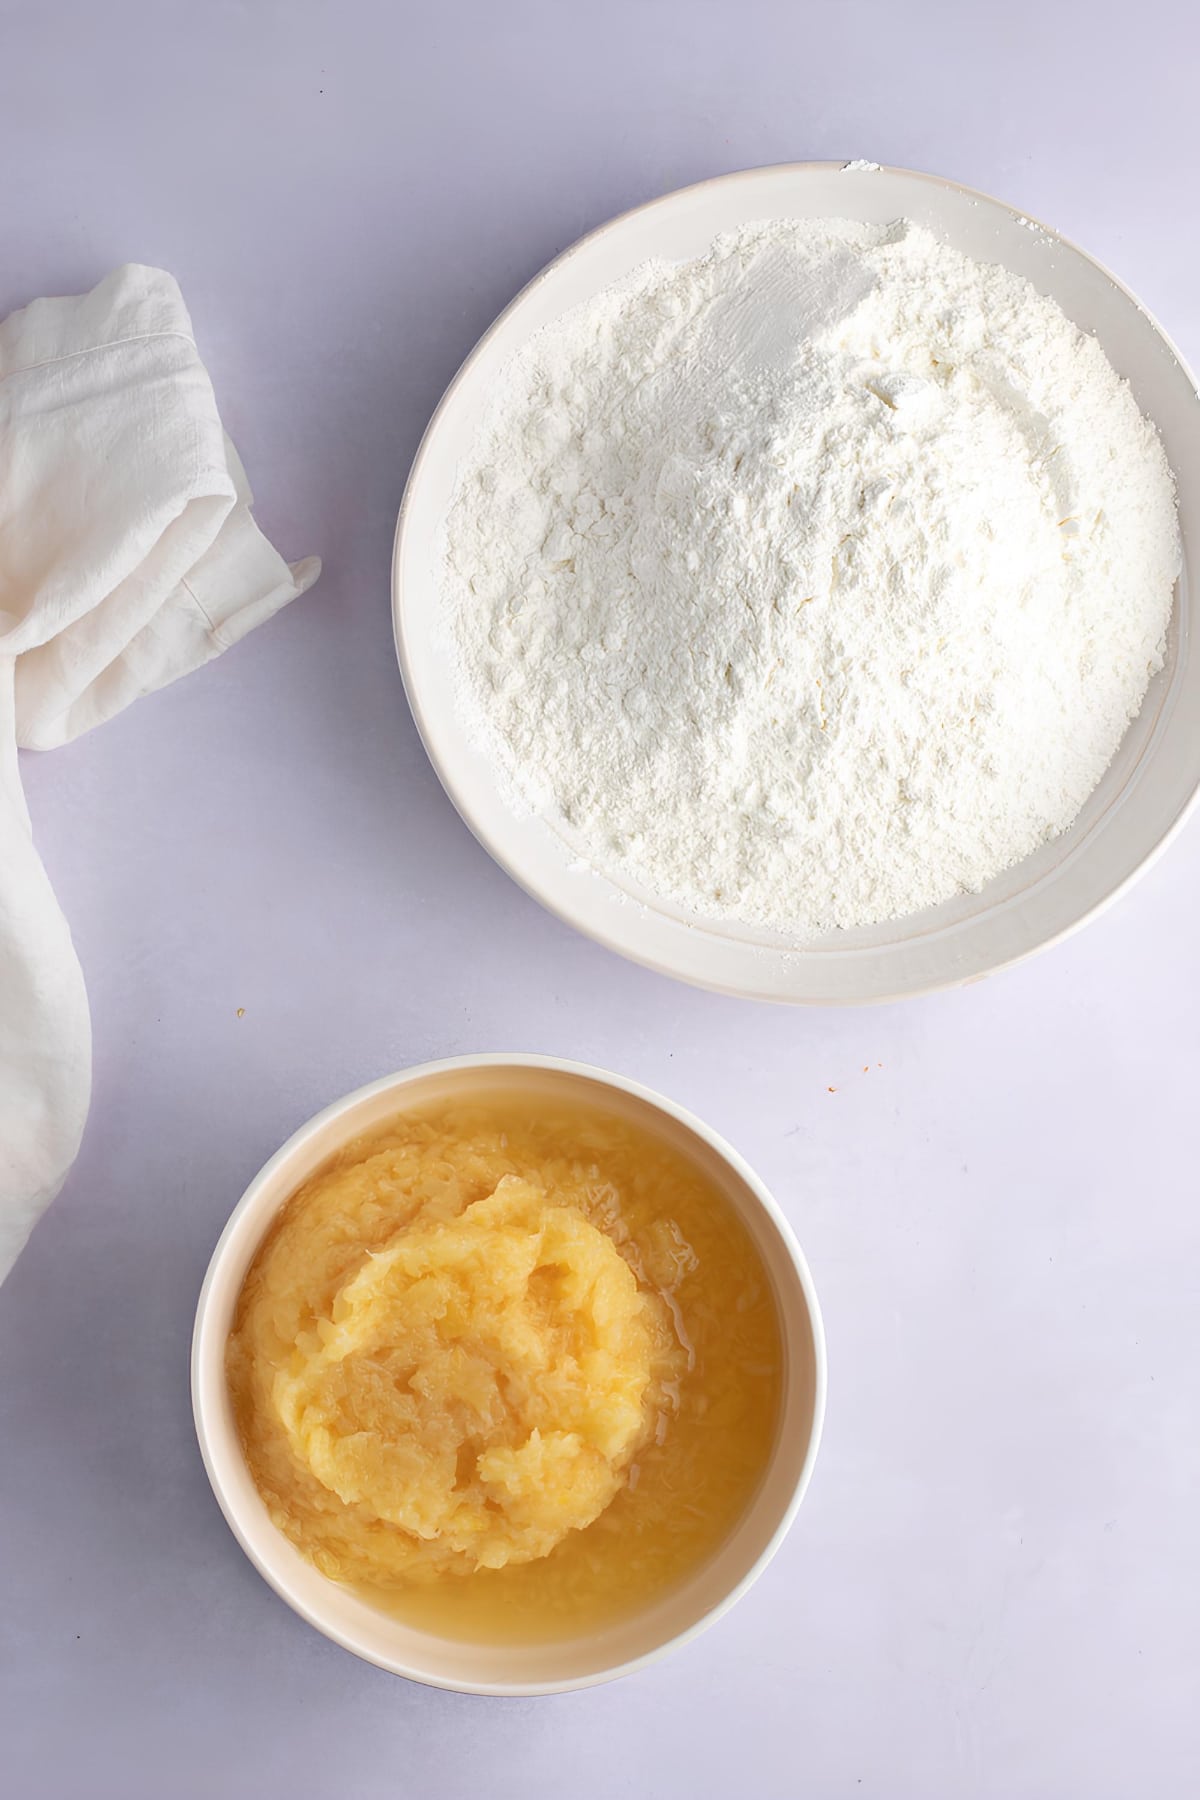 Pineapple Angel Food Cake Ingredients - Angel Food Cake Mix, Canned Crushed Pineapple and Frozen Whipped Cream